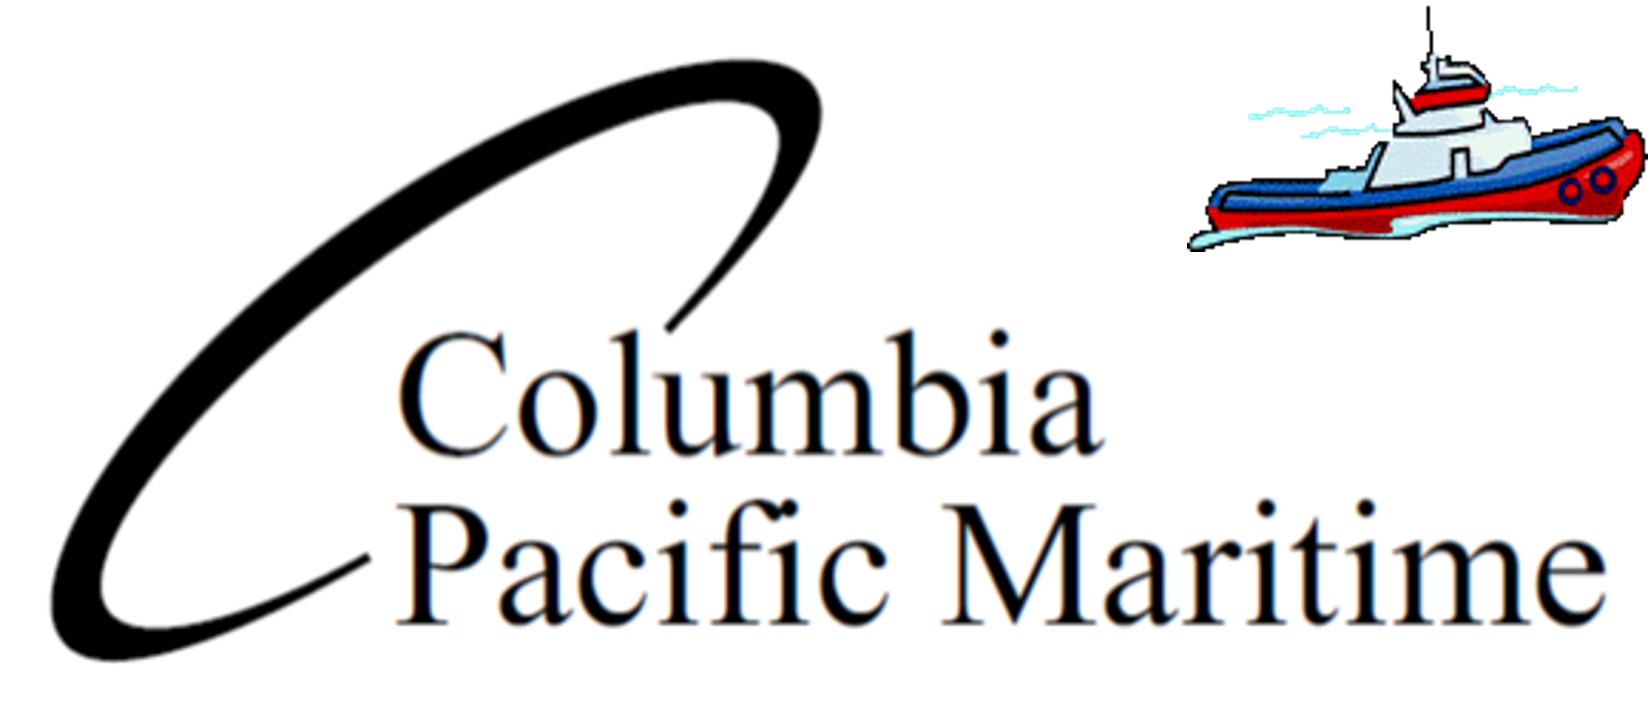 Columbia Pacific (ColPac) Maritime